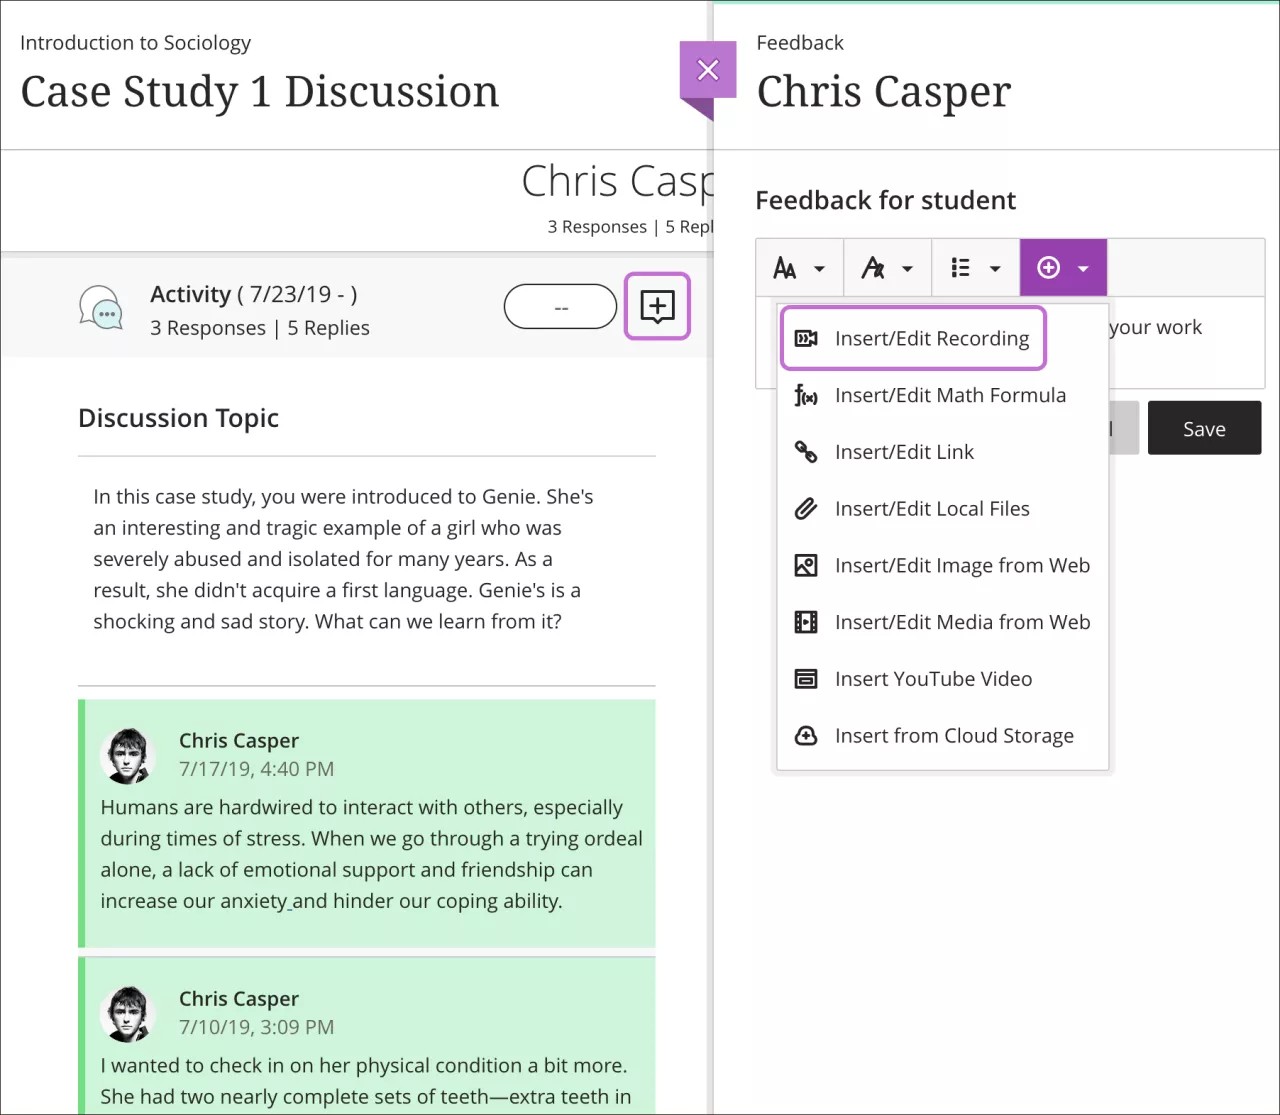 In the feedback panel, the expanded purple plus sign lets you insert feedback, and the  "Insert/Edit Recording" option is highlighted.